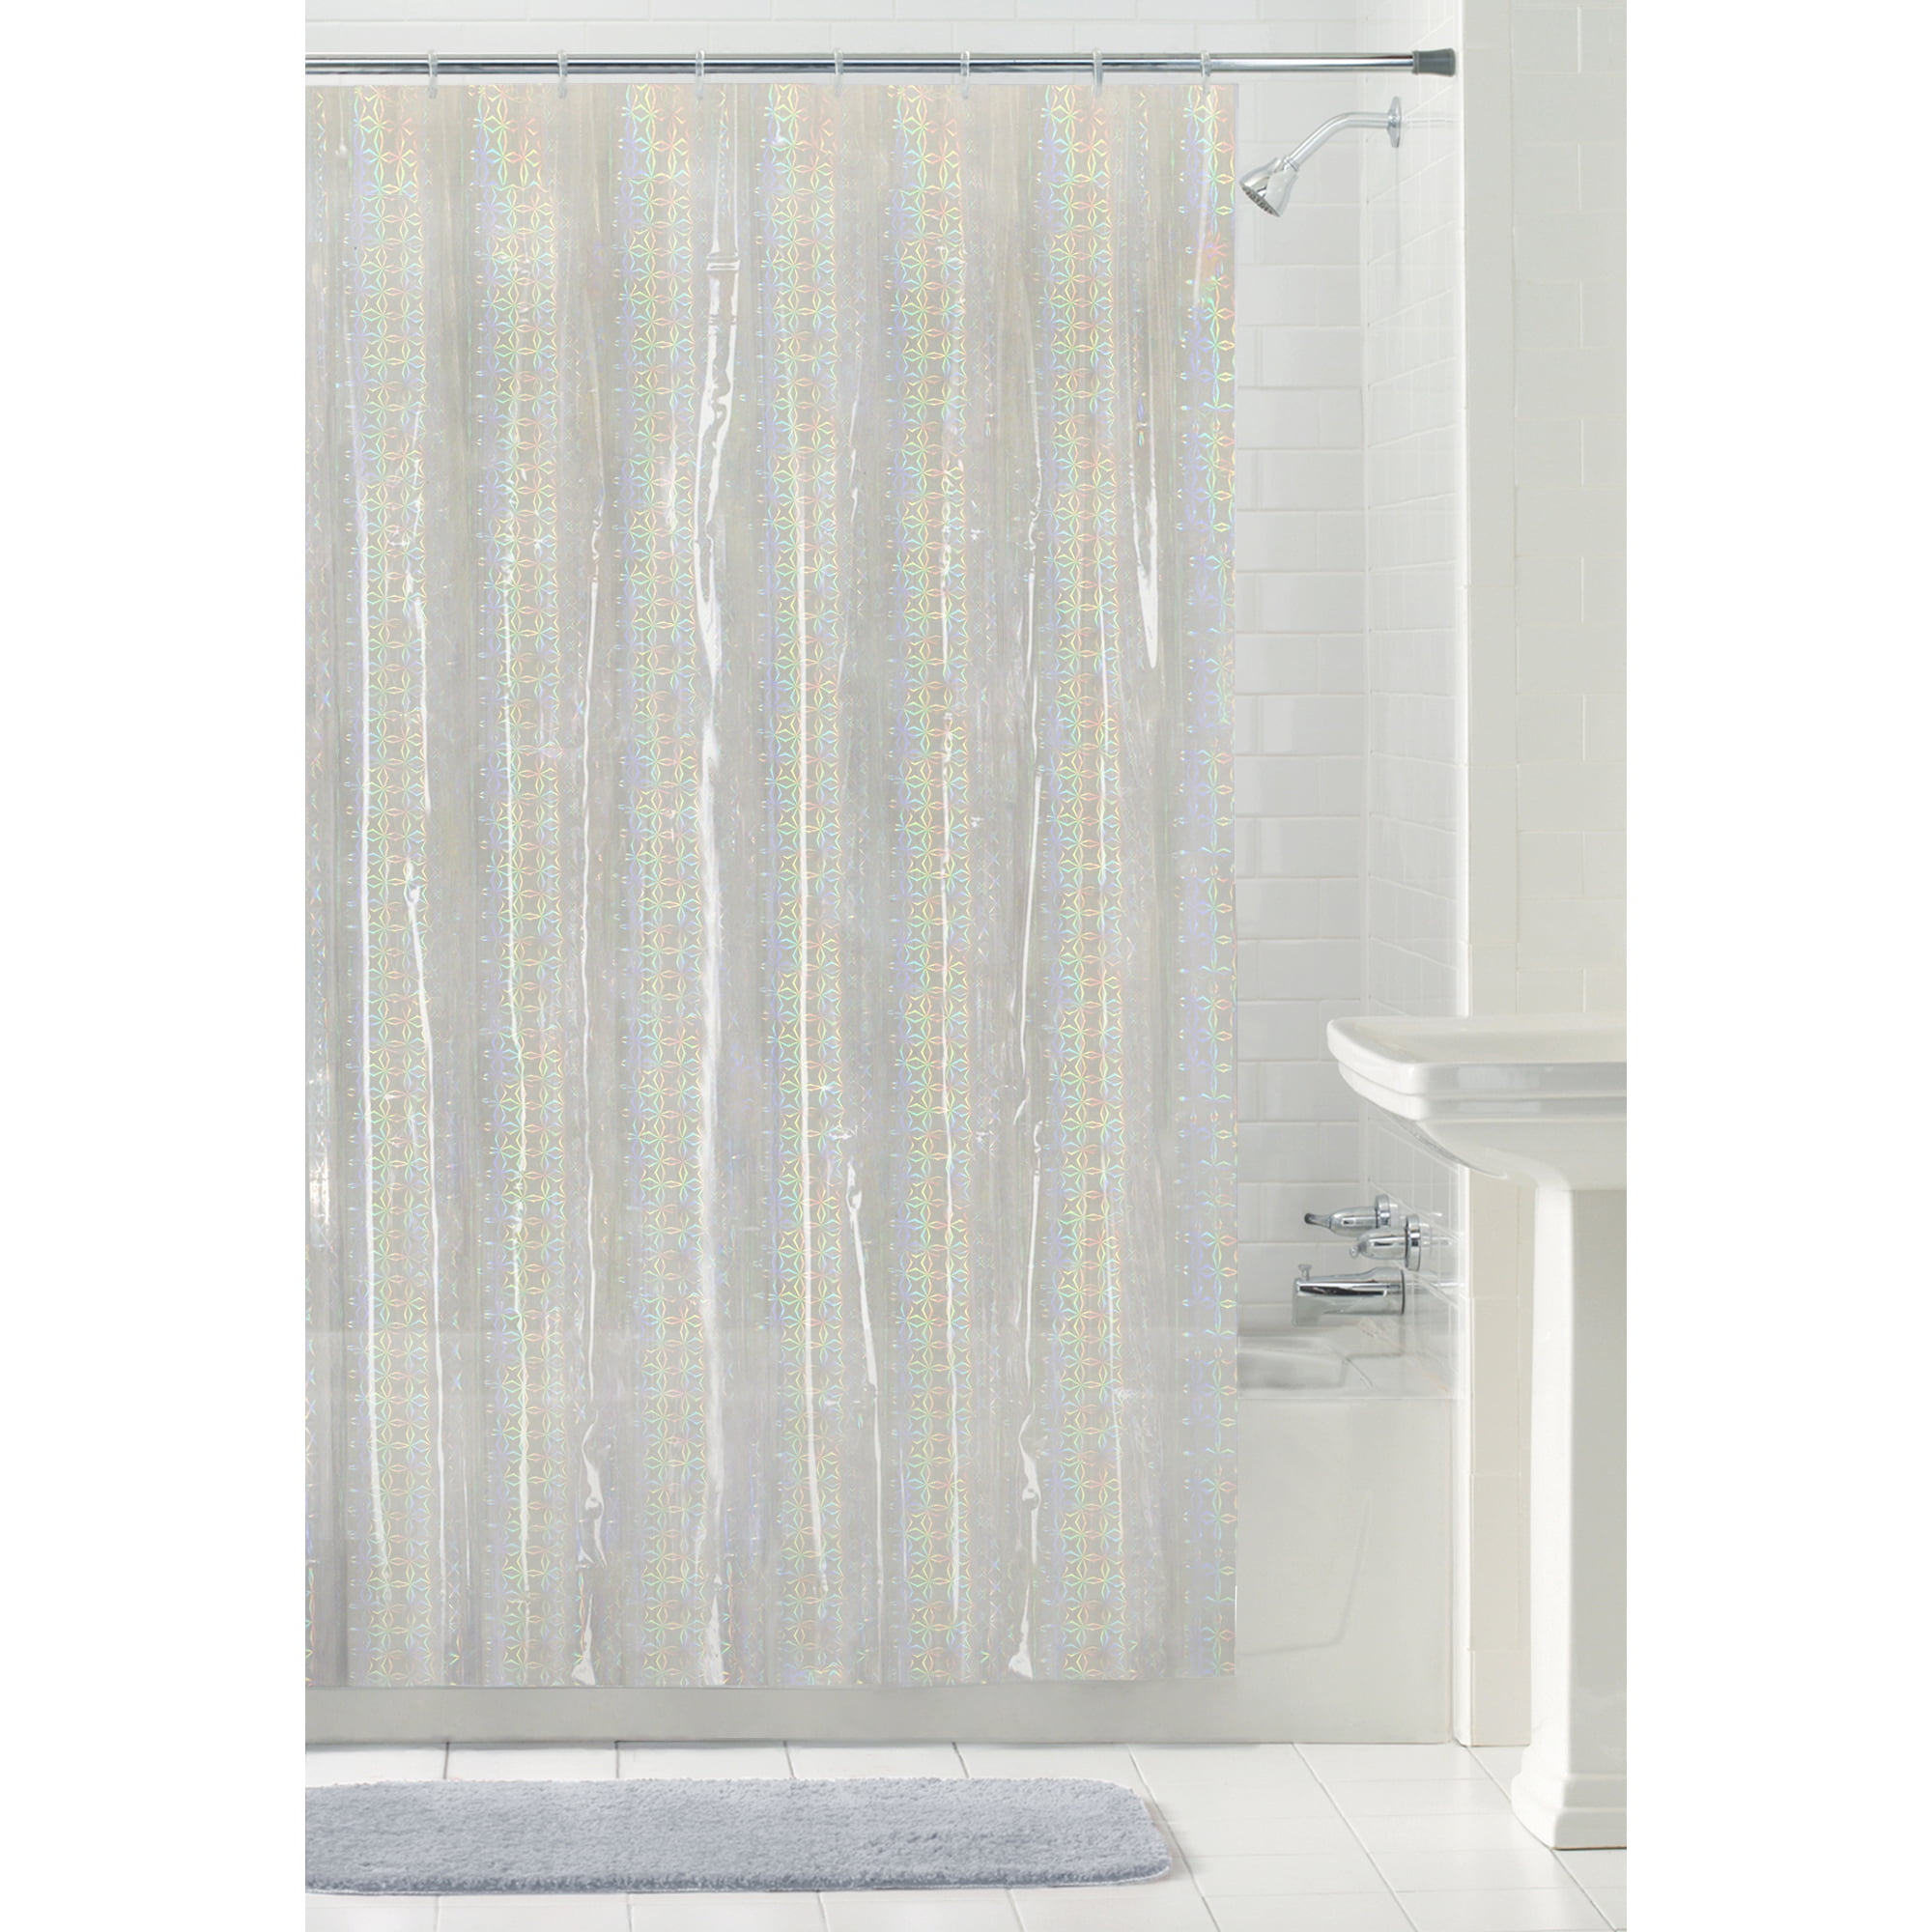 Details about  / Nice Shower Curtain PEVA 72/" x 72/" Multi-Color Triangle Shower Curtain Liner